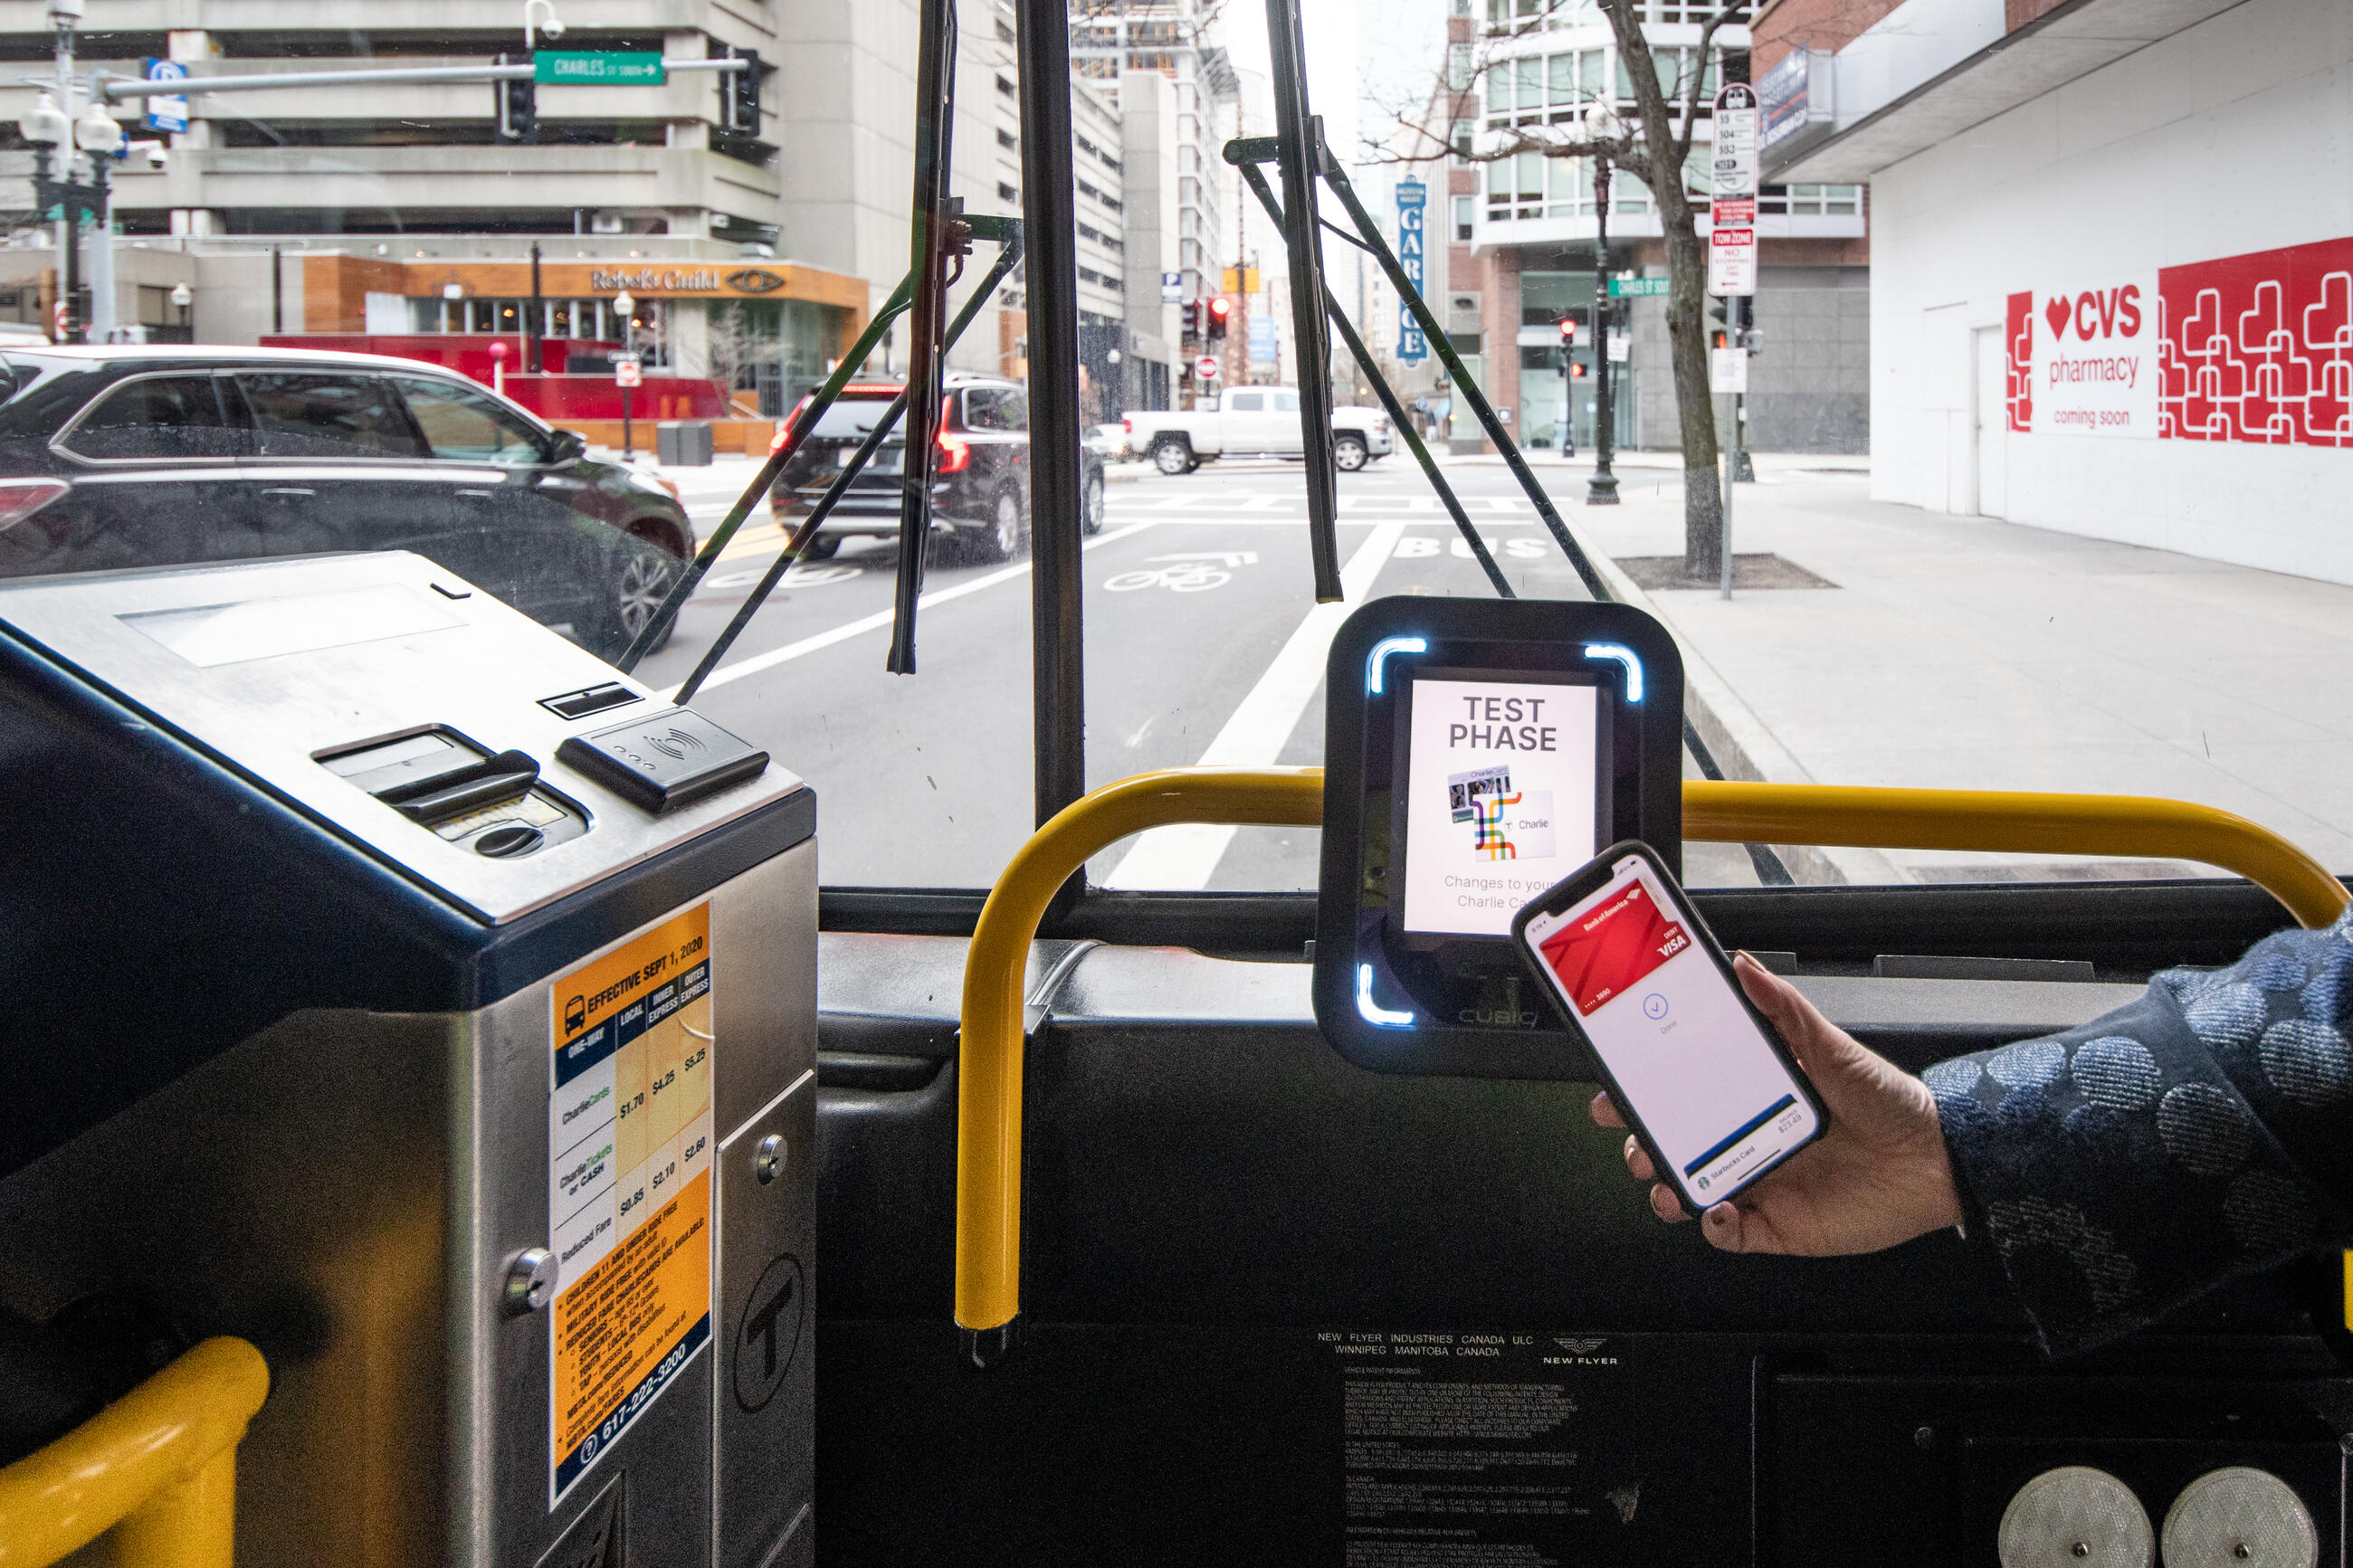 A bus rider pays their fare with their phone during a test of the T's new fare system on an MBTA bus in downtown Boston in January 2021.